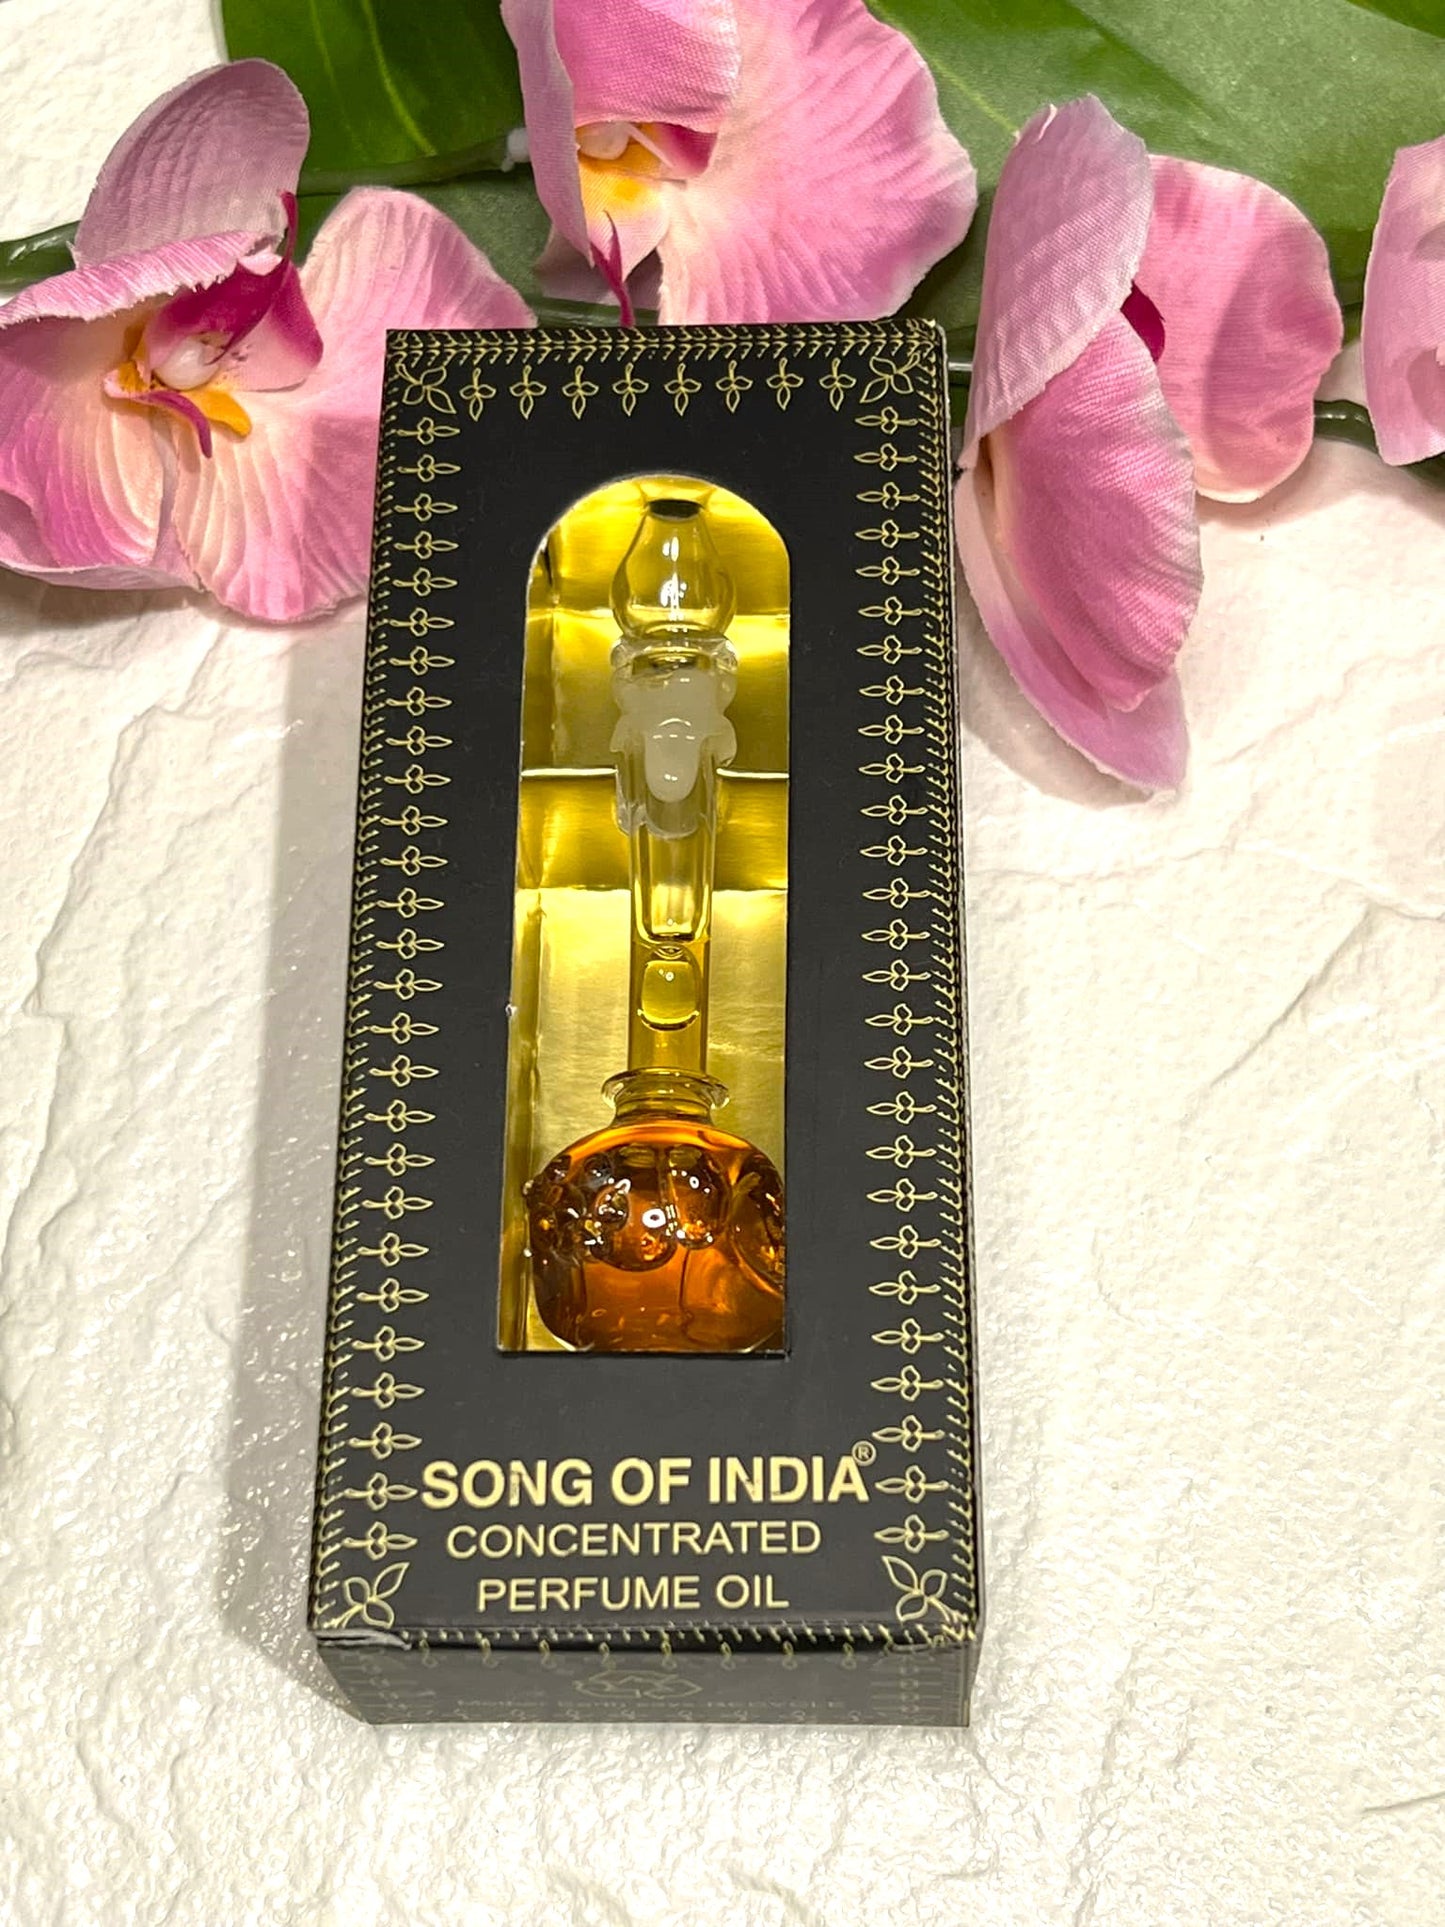 Song of India Concentrated Perfume Oil (various scents)